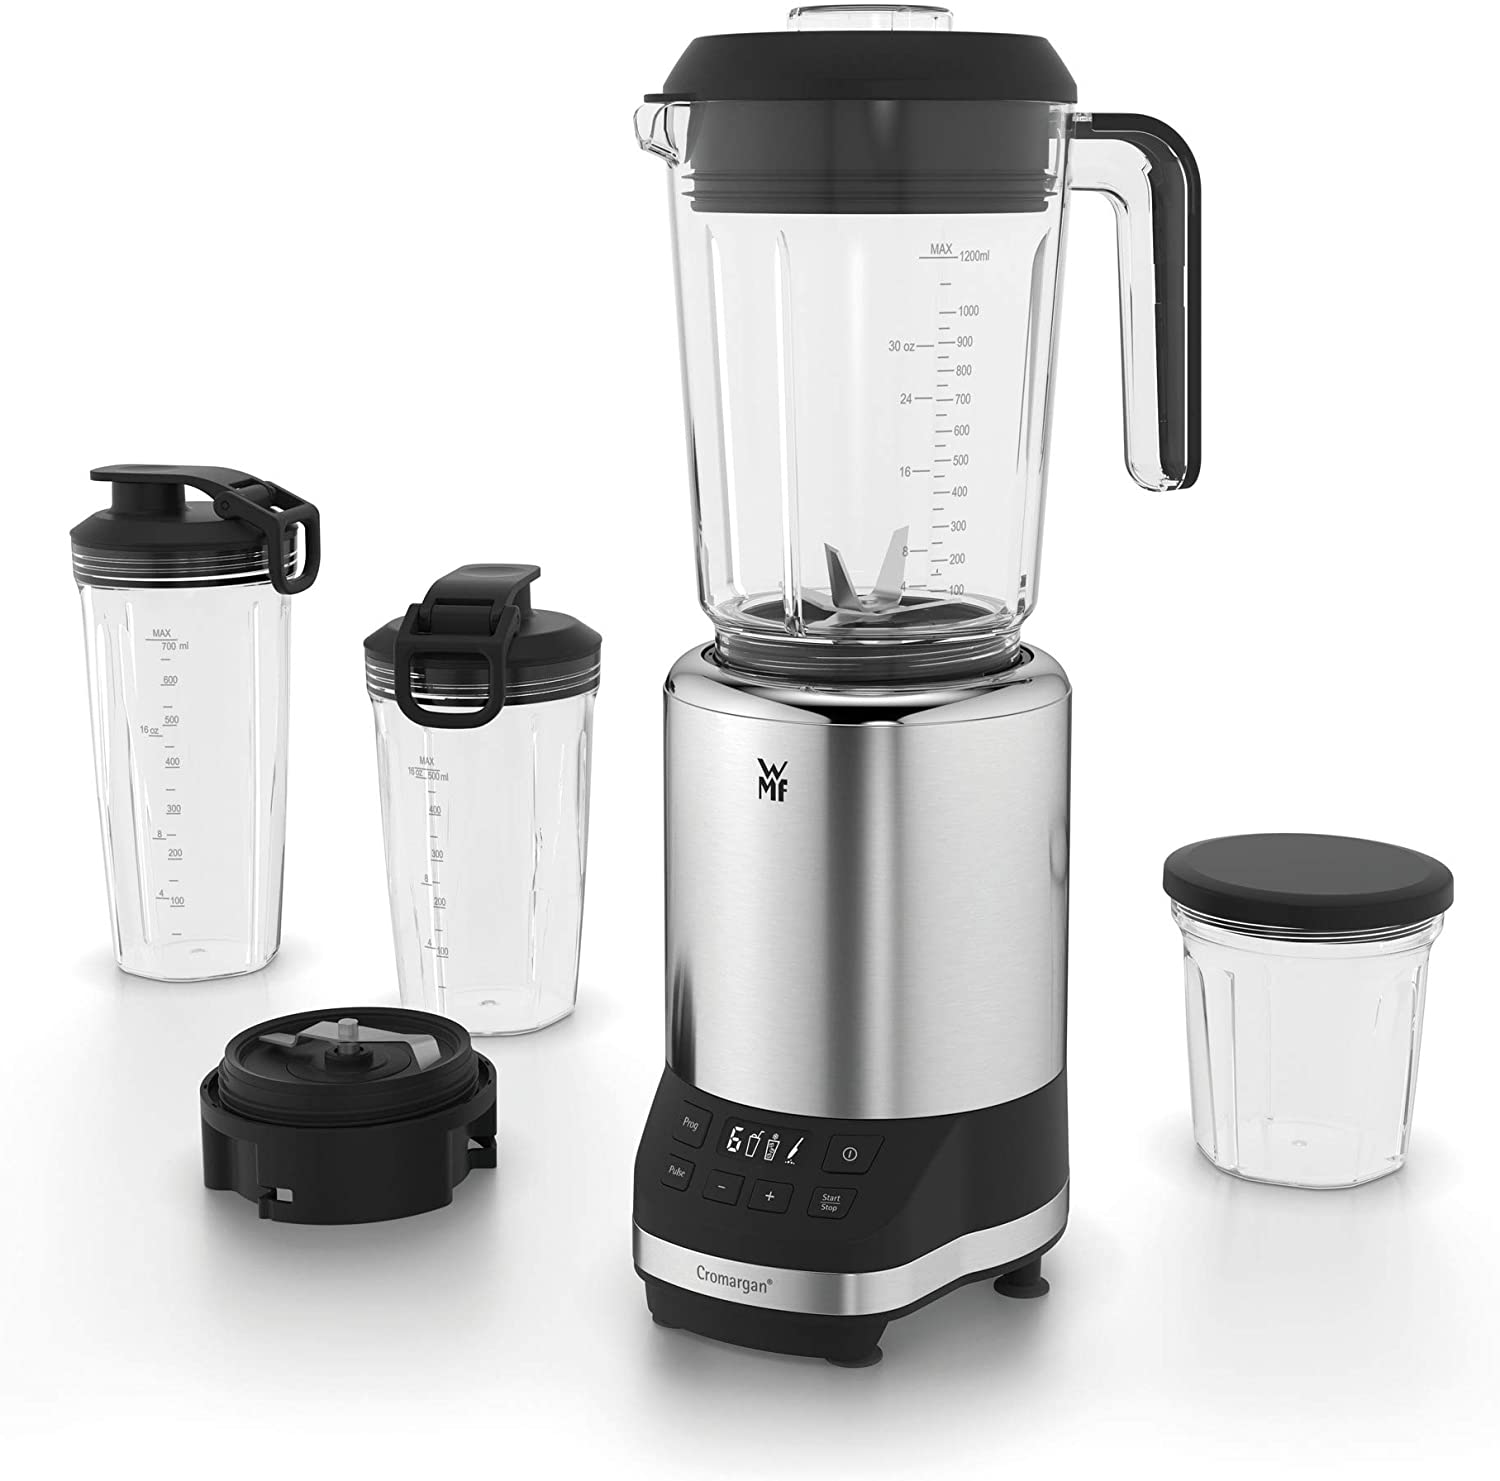 WMF Kult Pro Multifunctional Mixer, High-Performance Mixer, 30,000 rpm, Smoothie Maker, Stand Mixer, Ice-Crush Function, 4 Mixing Containers Including ToGo Closure